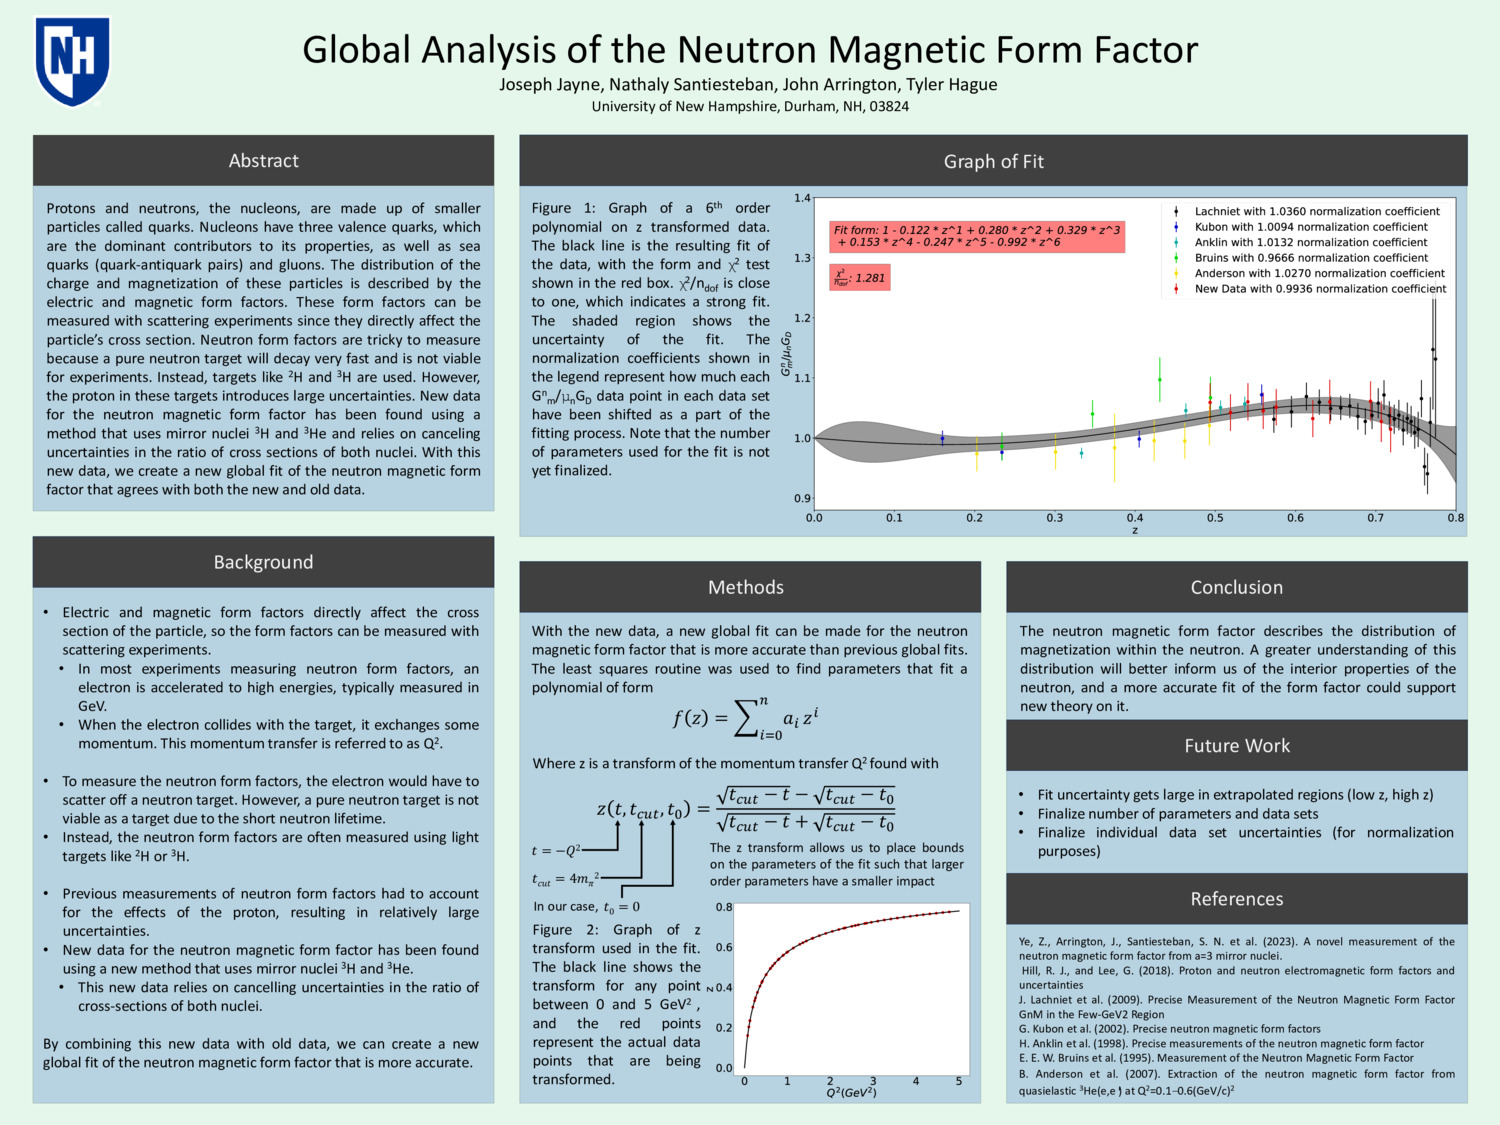 Global Analysis Of The Neutron Magnetic Form Factor by jpj1022